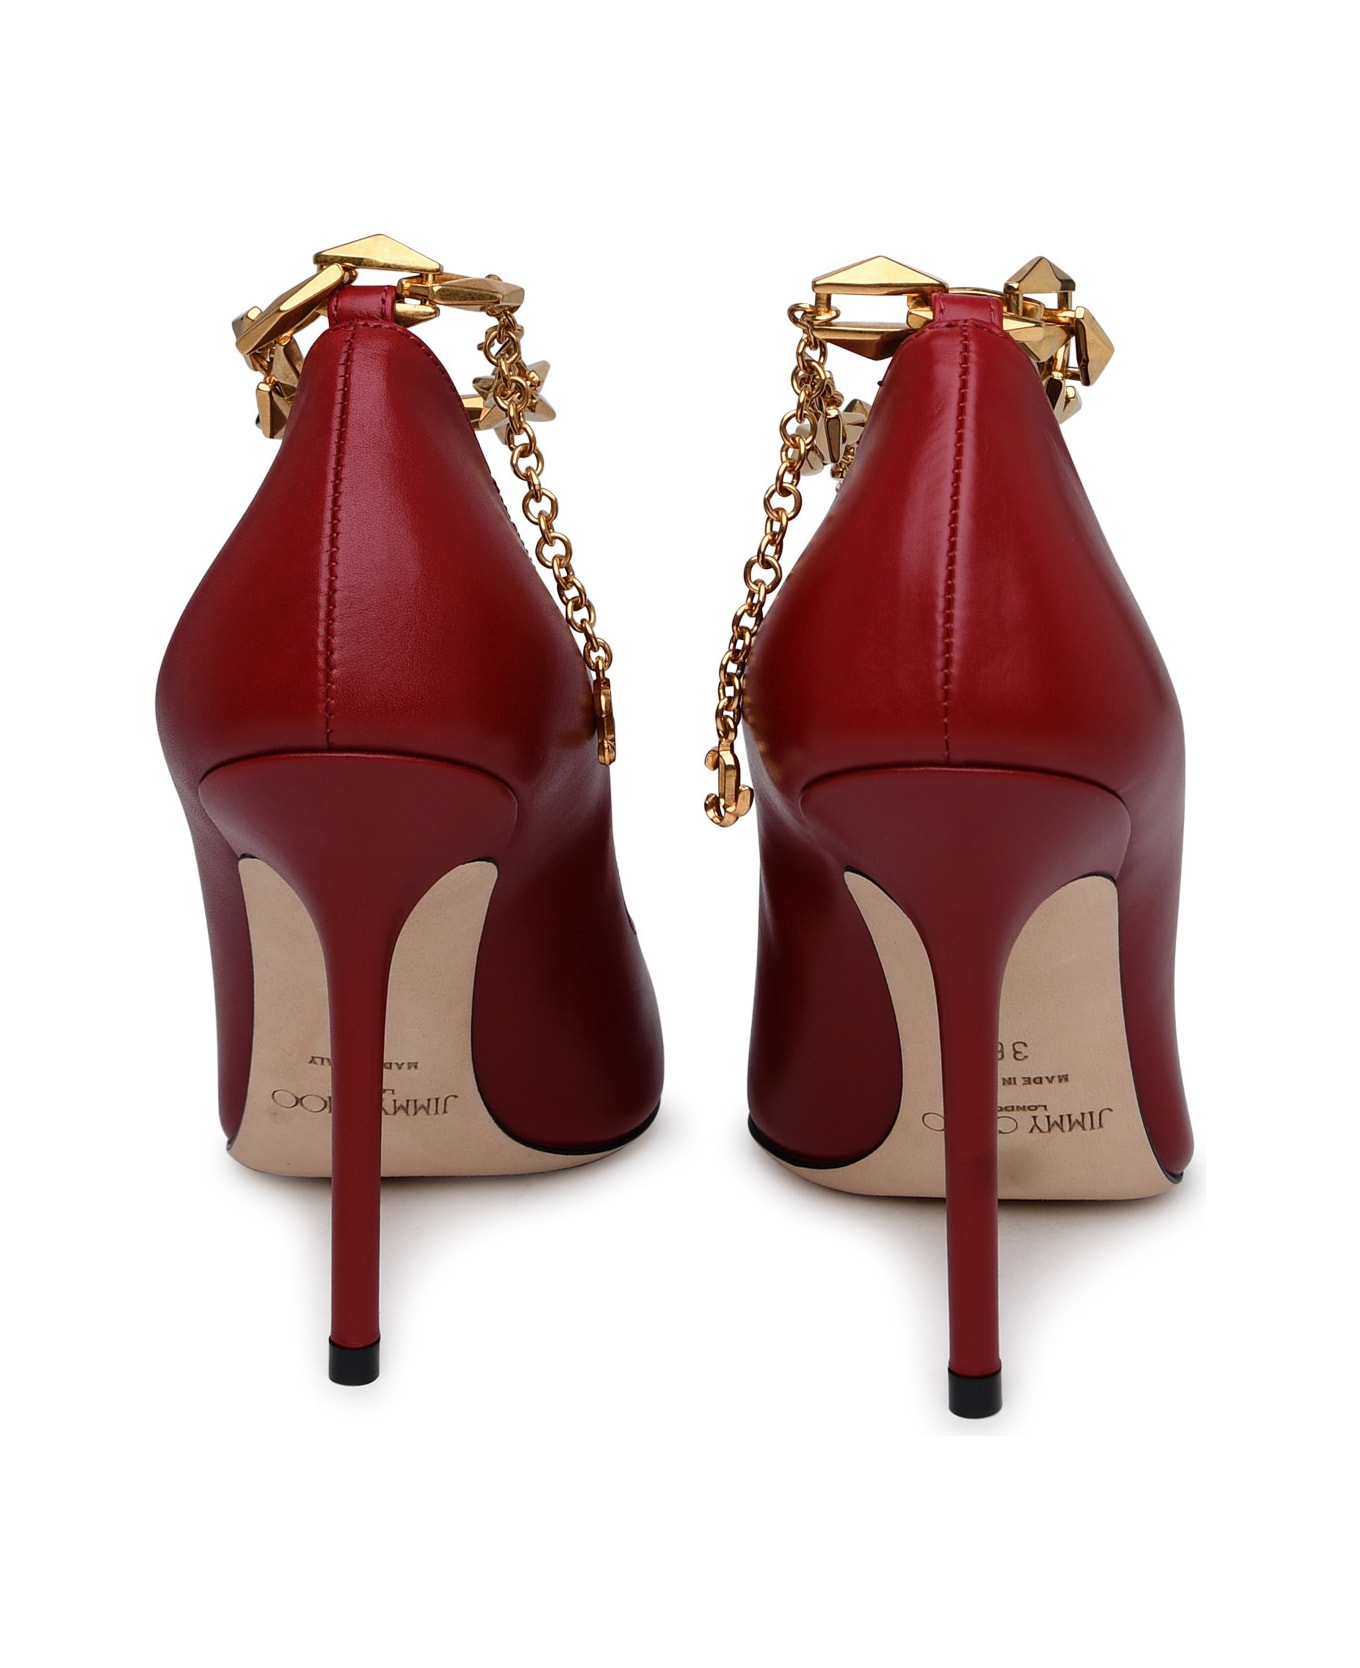 Jimmy Choo Diamond Pumps In Red Leather - Red